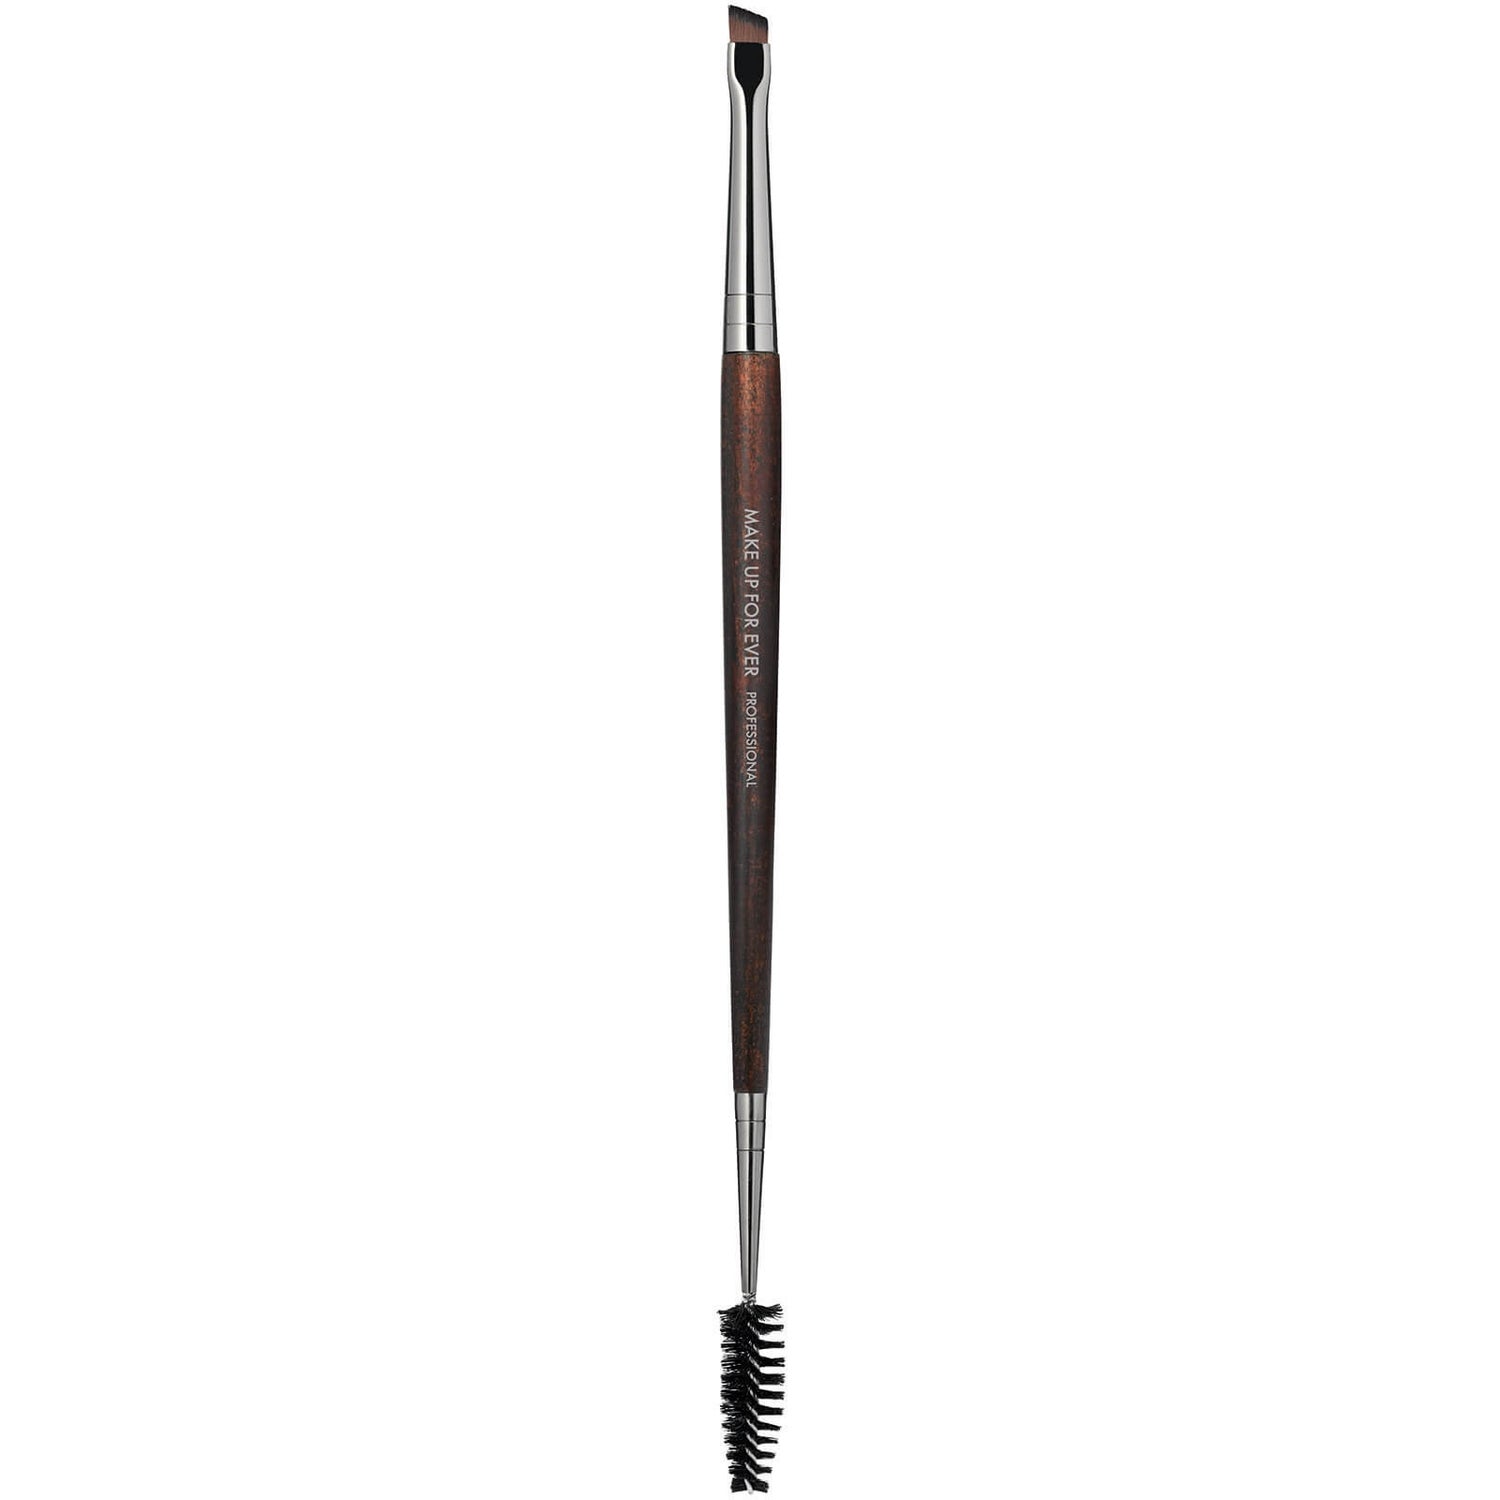 MAKE UP FOR EVER #274 Double Ended Eyebrow/Lash Brush -